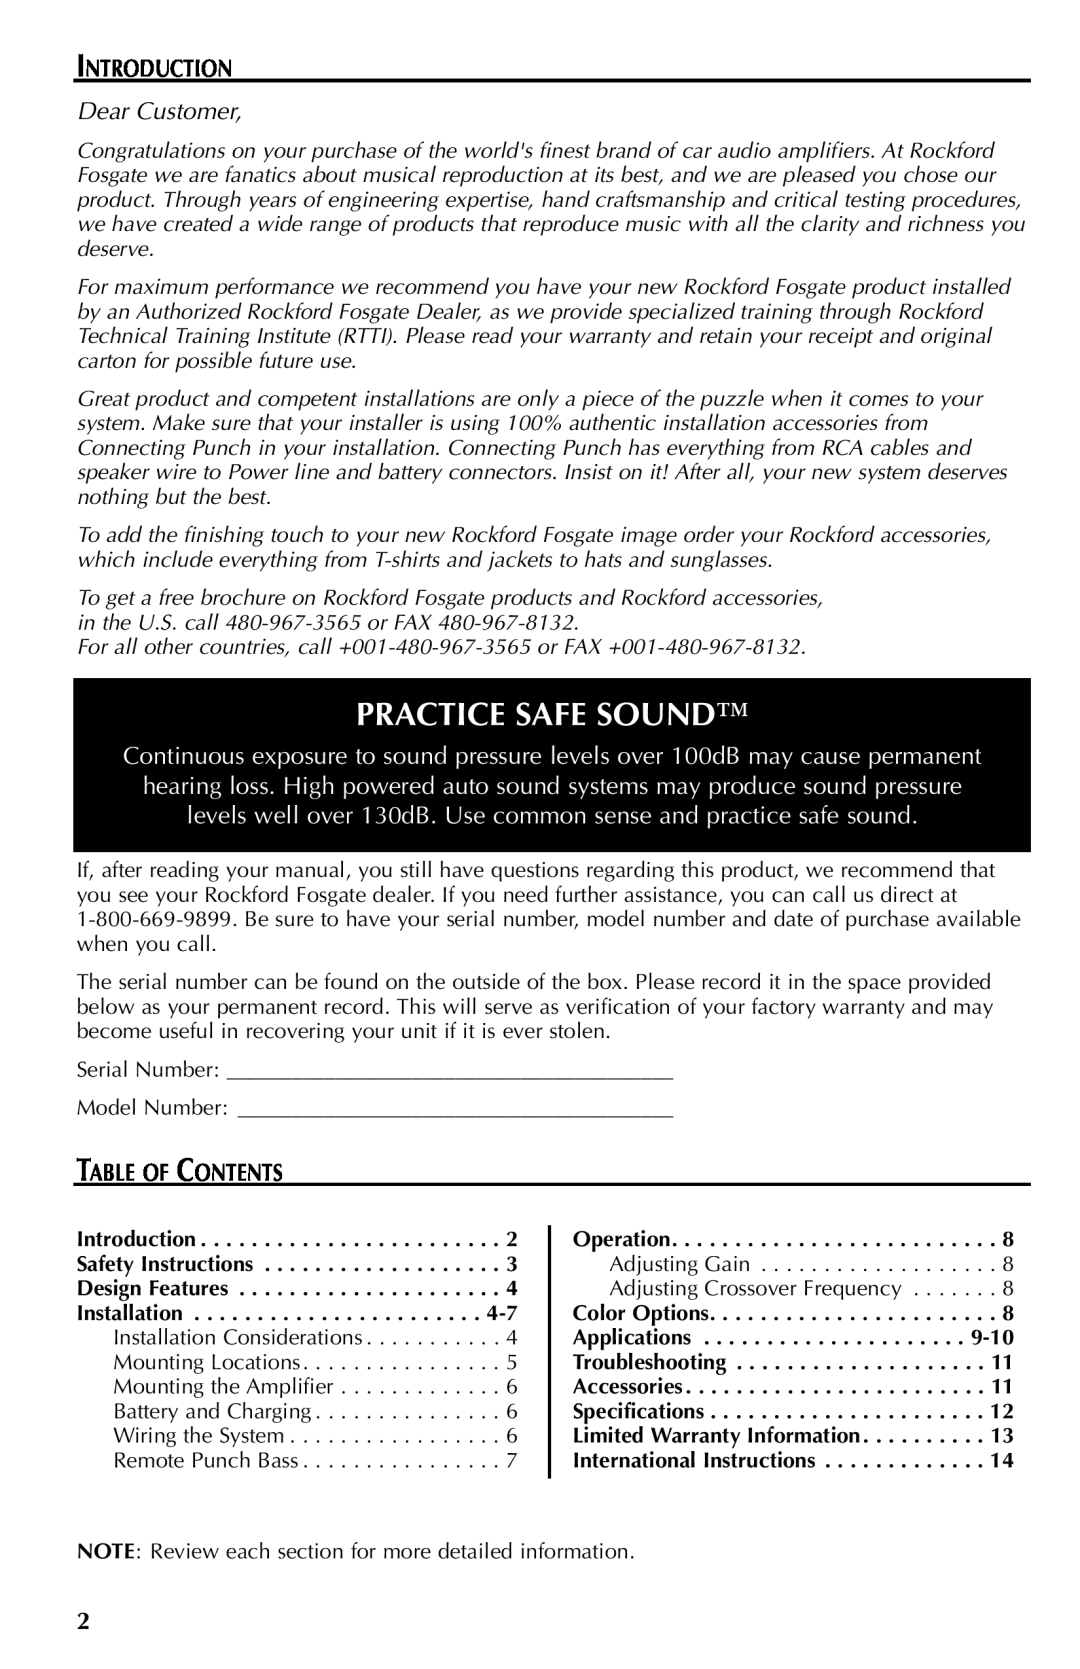 Rockford Fosgate FFX6 manual Practice Safe Sound, Introduction, Dear Customer, Table Of Contents 